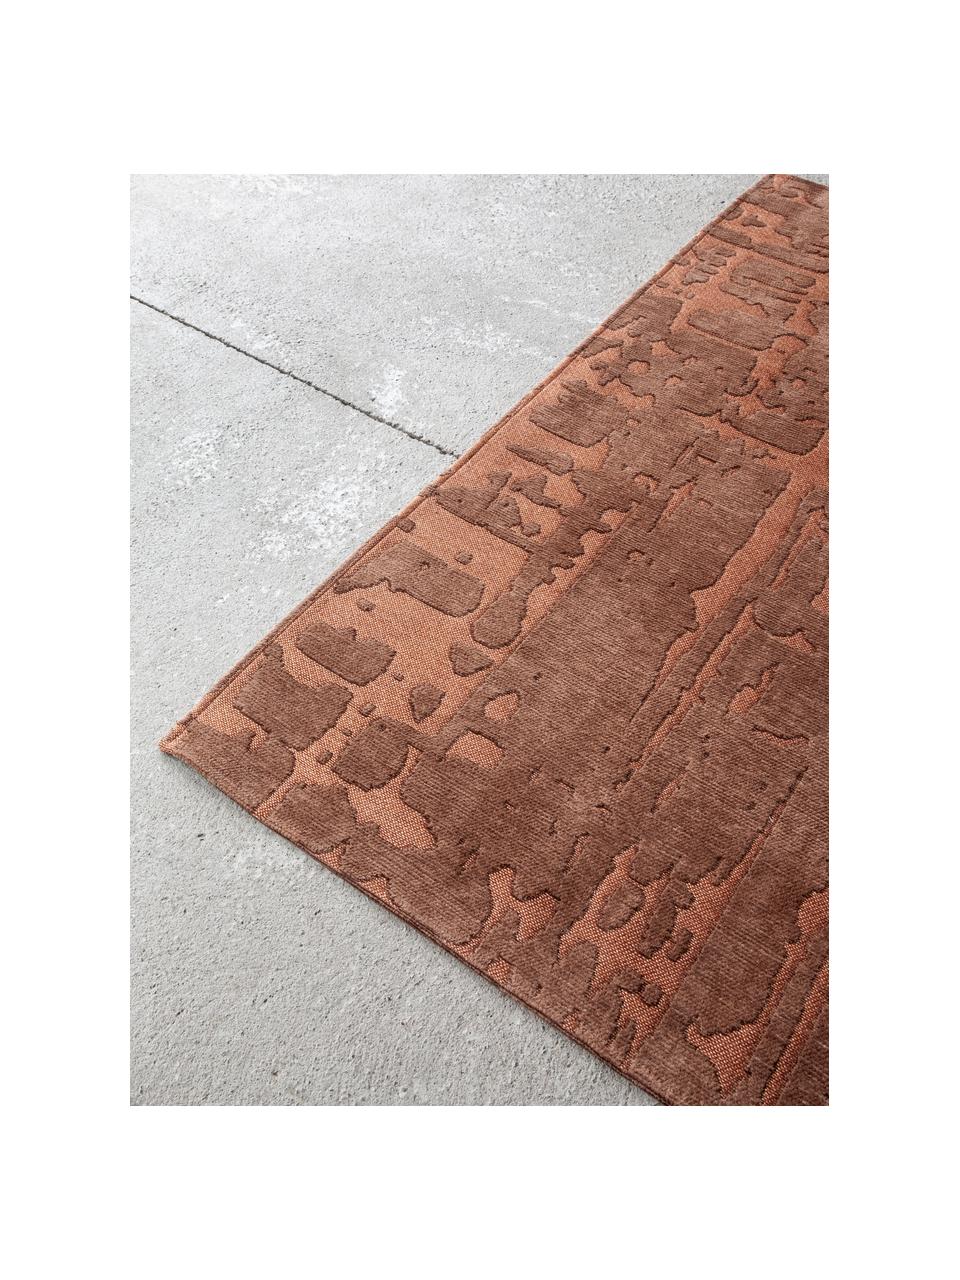 Tapis texturé Perriers, 100 % polyester, Terracotta, larg. 80 x long. 150 cm (taille XS)